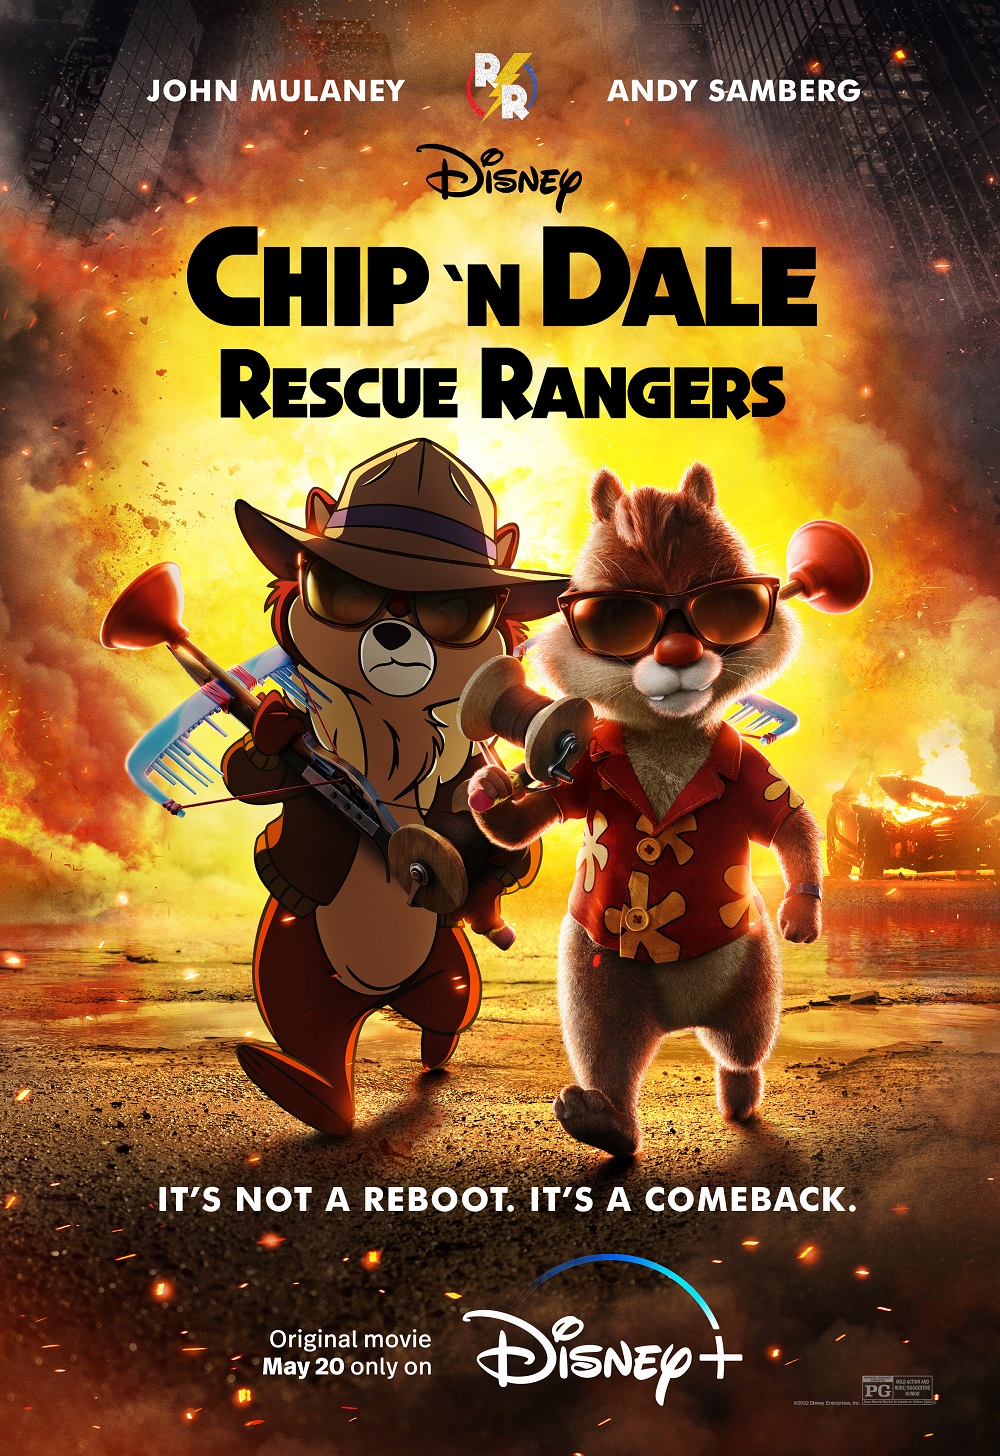 Chip ’n’ Dale: Rescue Rangers